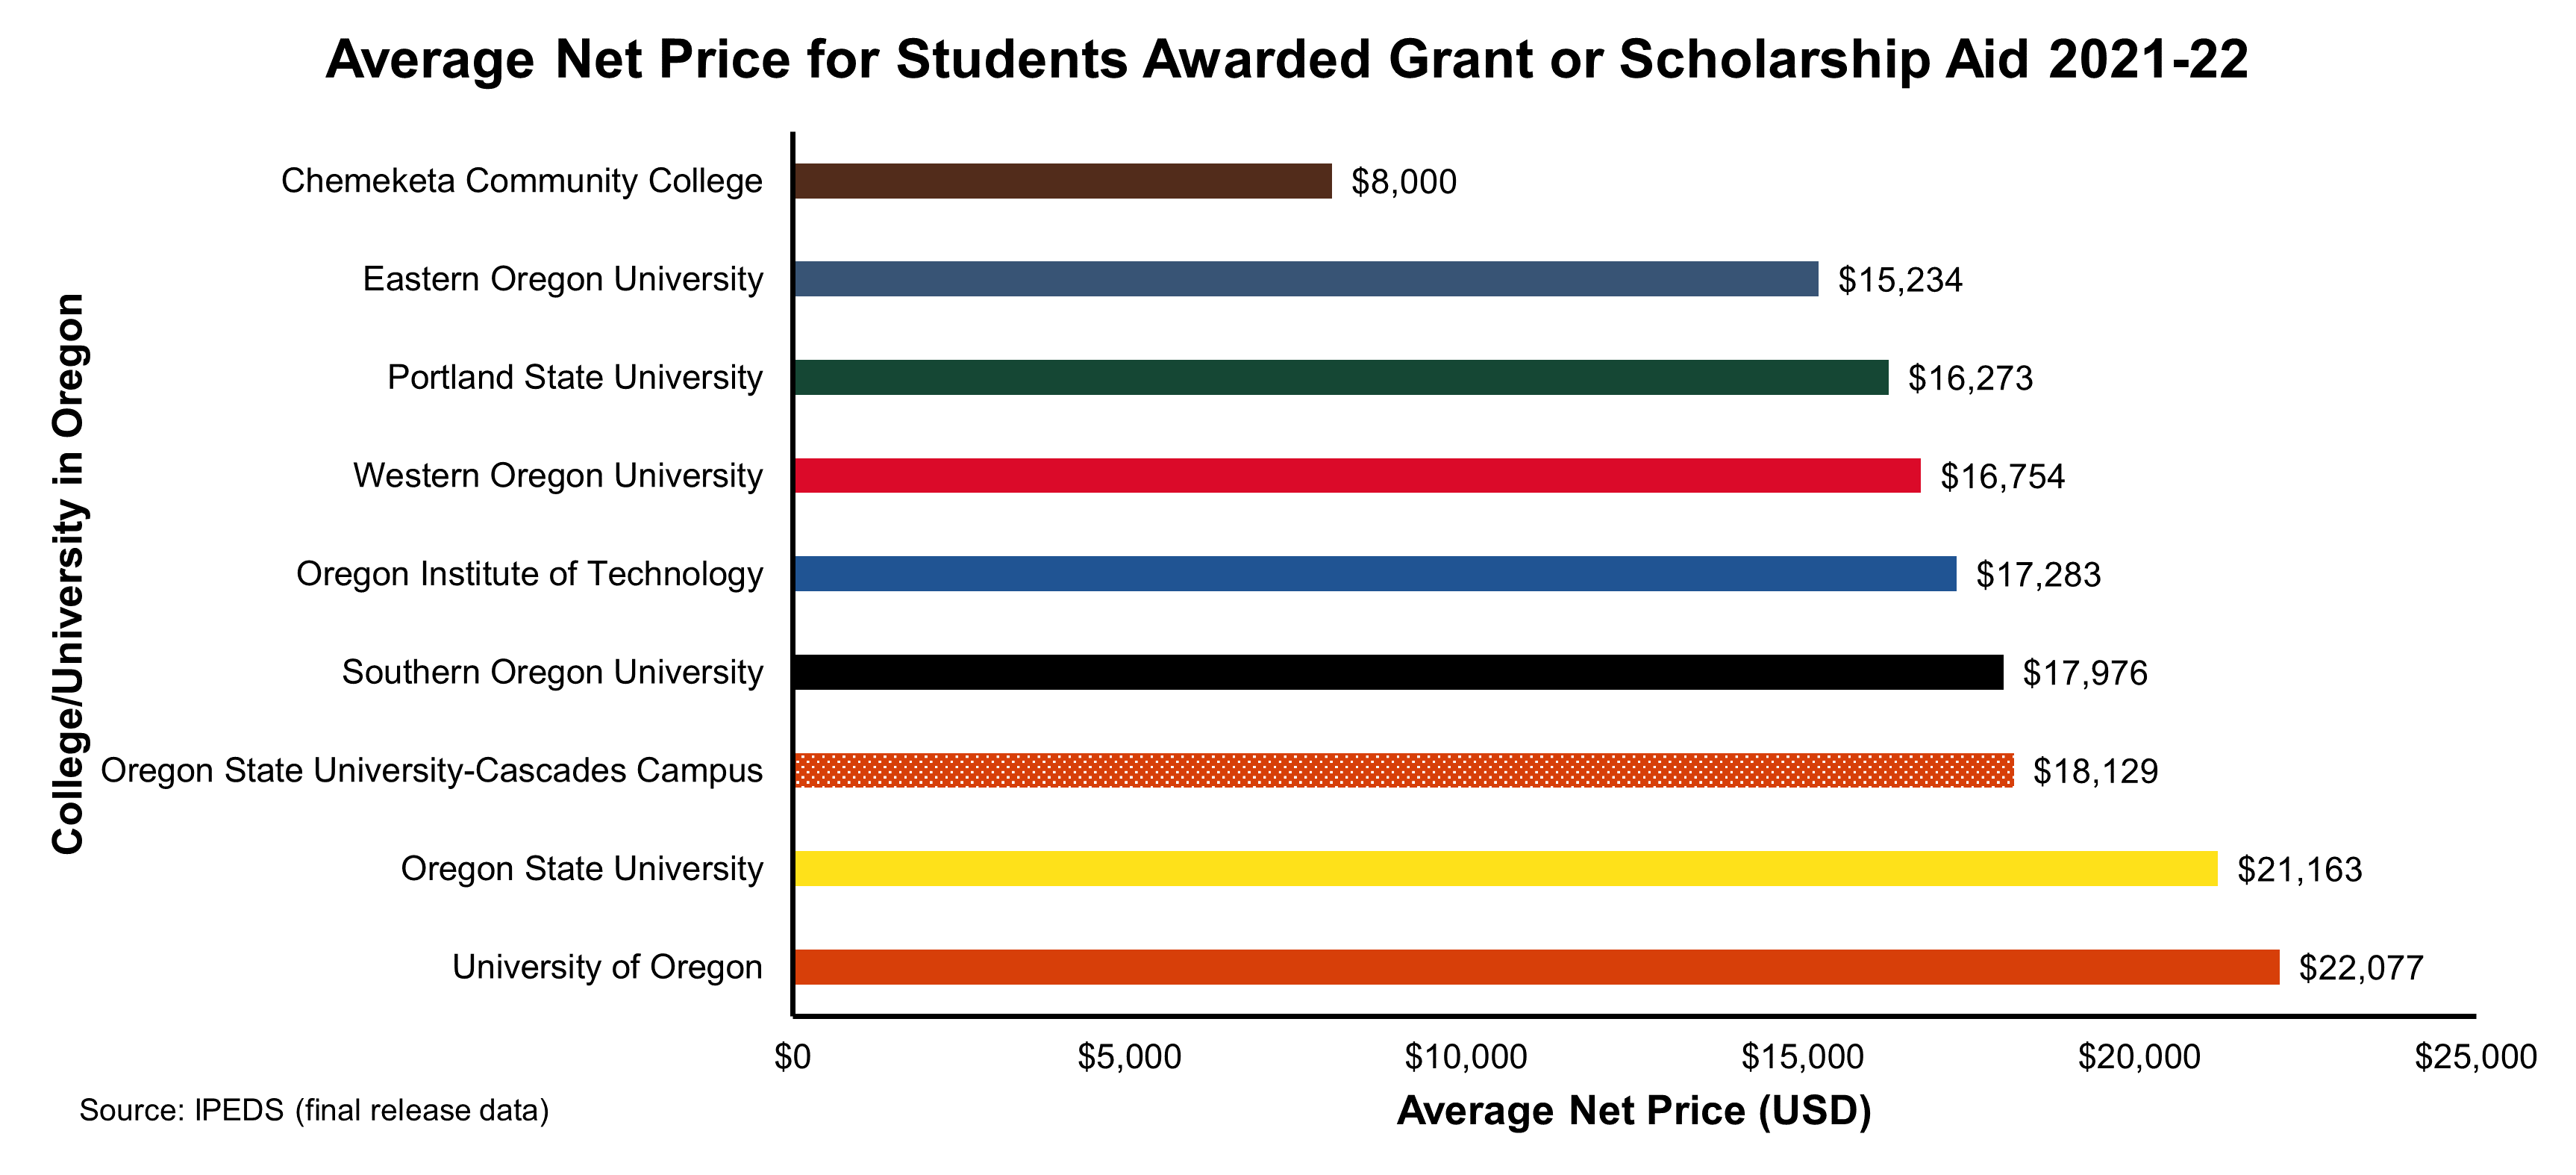 Bar graph of average net price for students awarded grant or scholarship aid at WOU and Other Public Universities in the 2021-2022 school year, showing that WOU is near the median on average net price